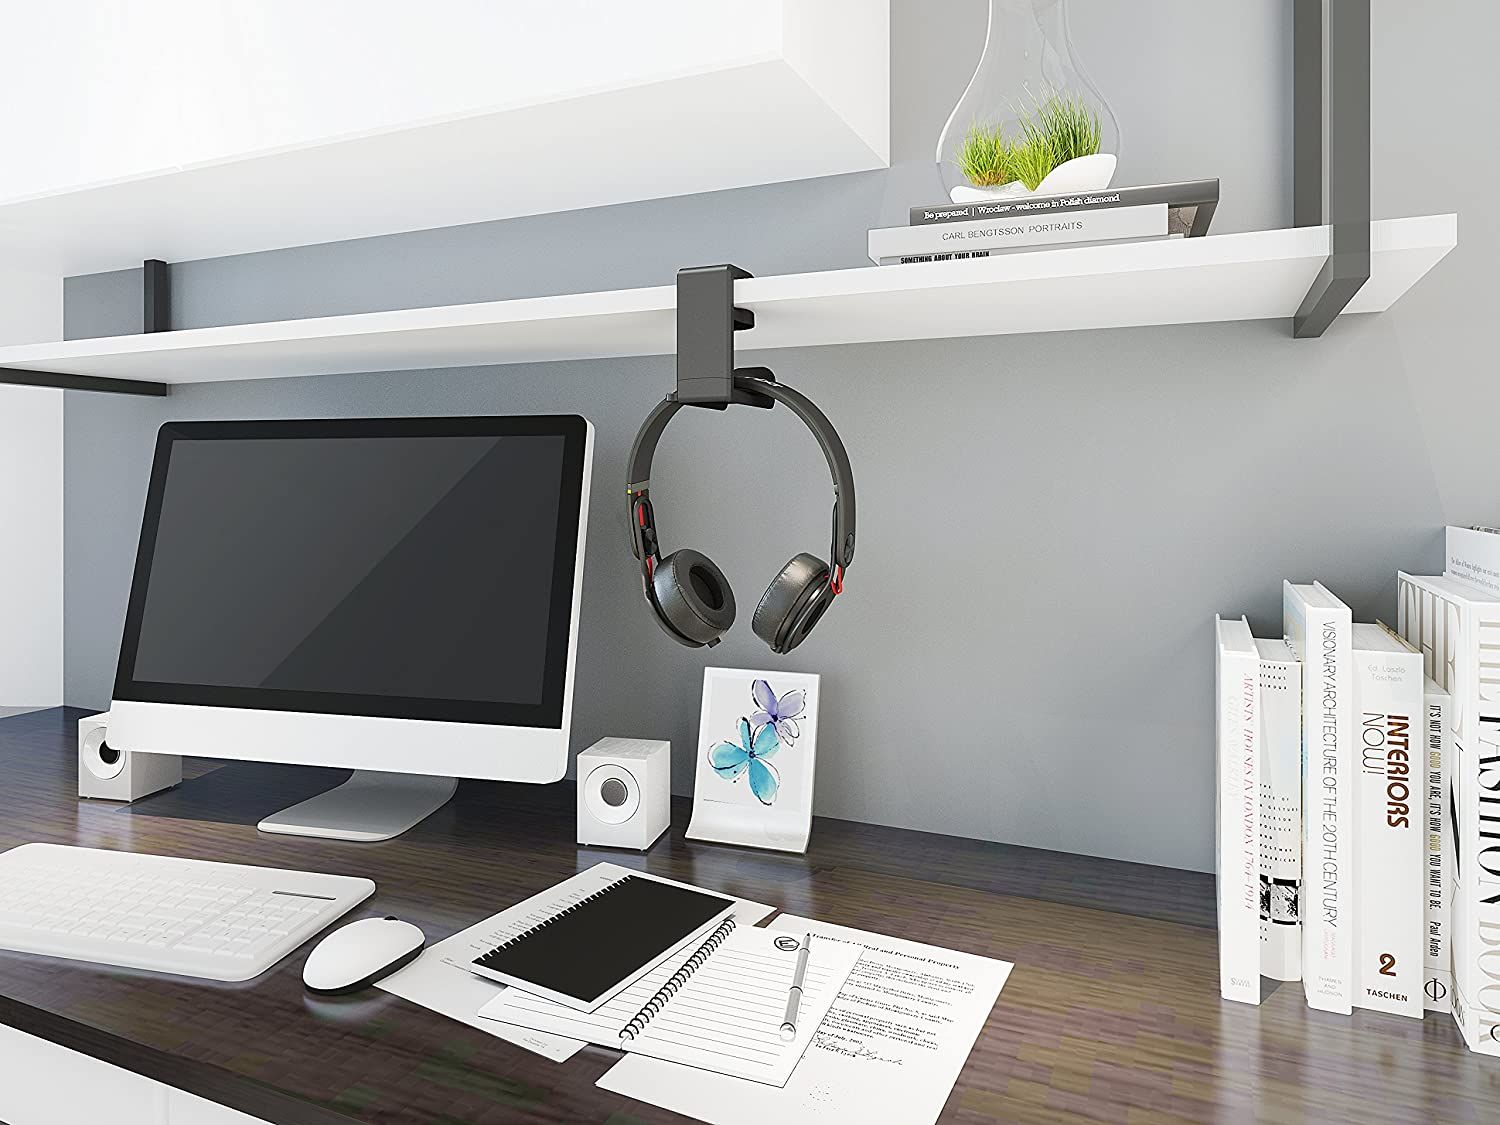 eurpmask headphone hook holder attached to a shelf